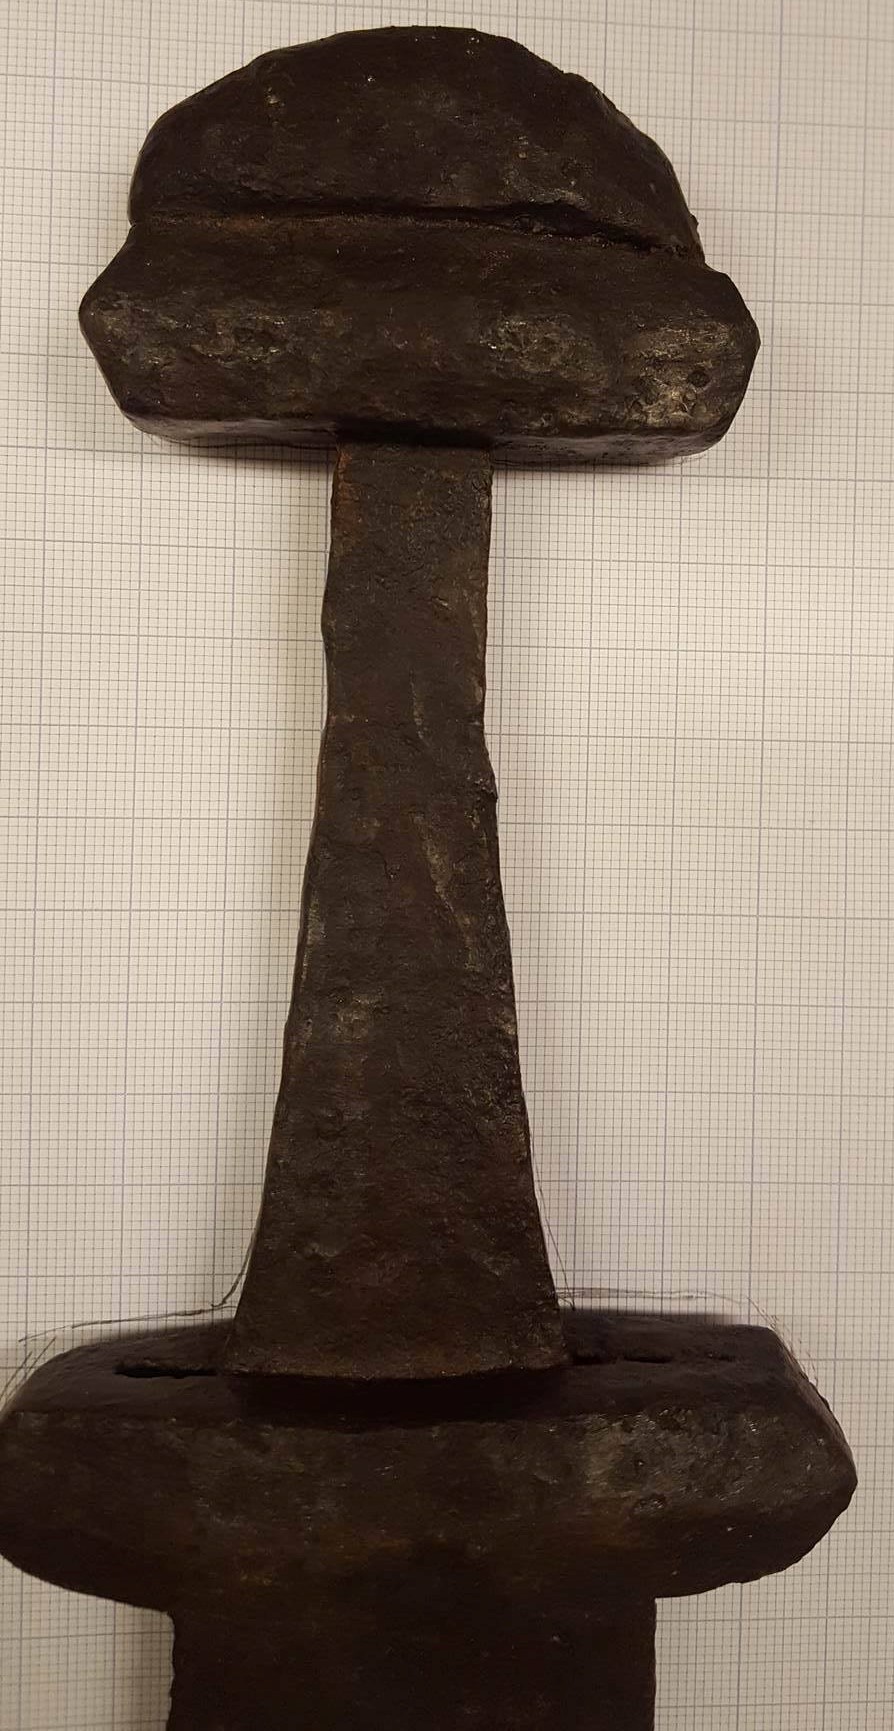 Hilt of the sword, composed of lower guard (below), tang, upper guard and pommel (above). Photo: courtesy of Tord Bergelin.